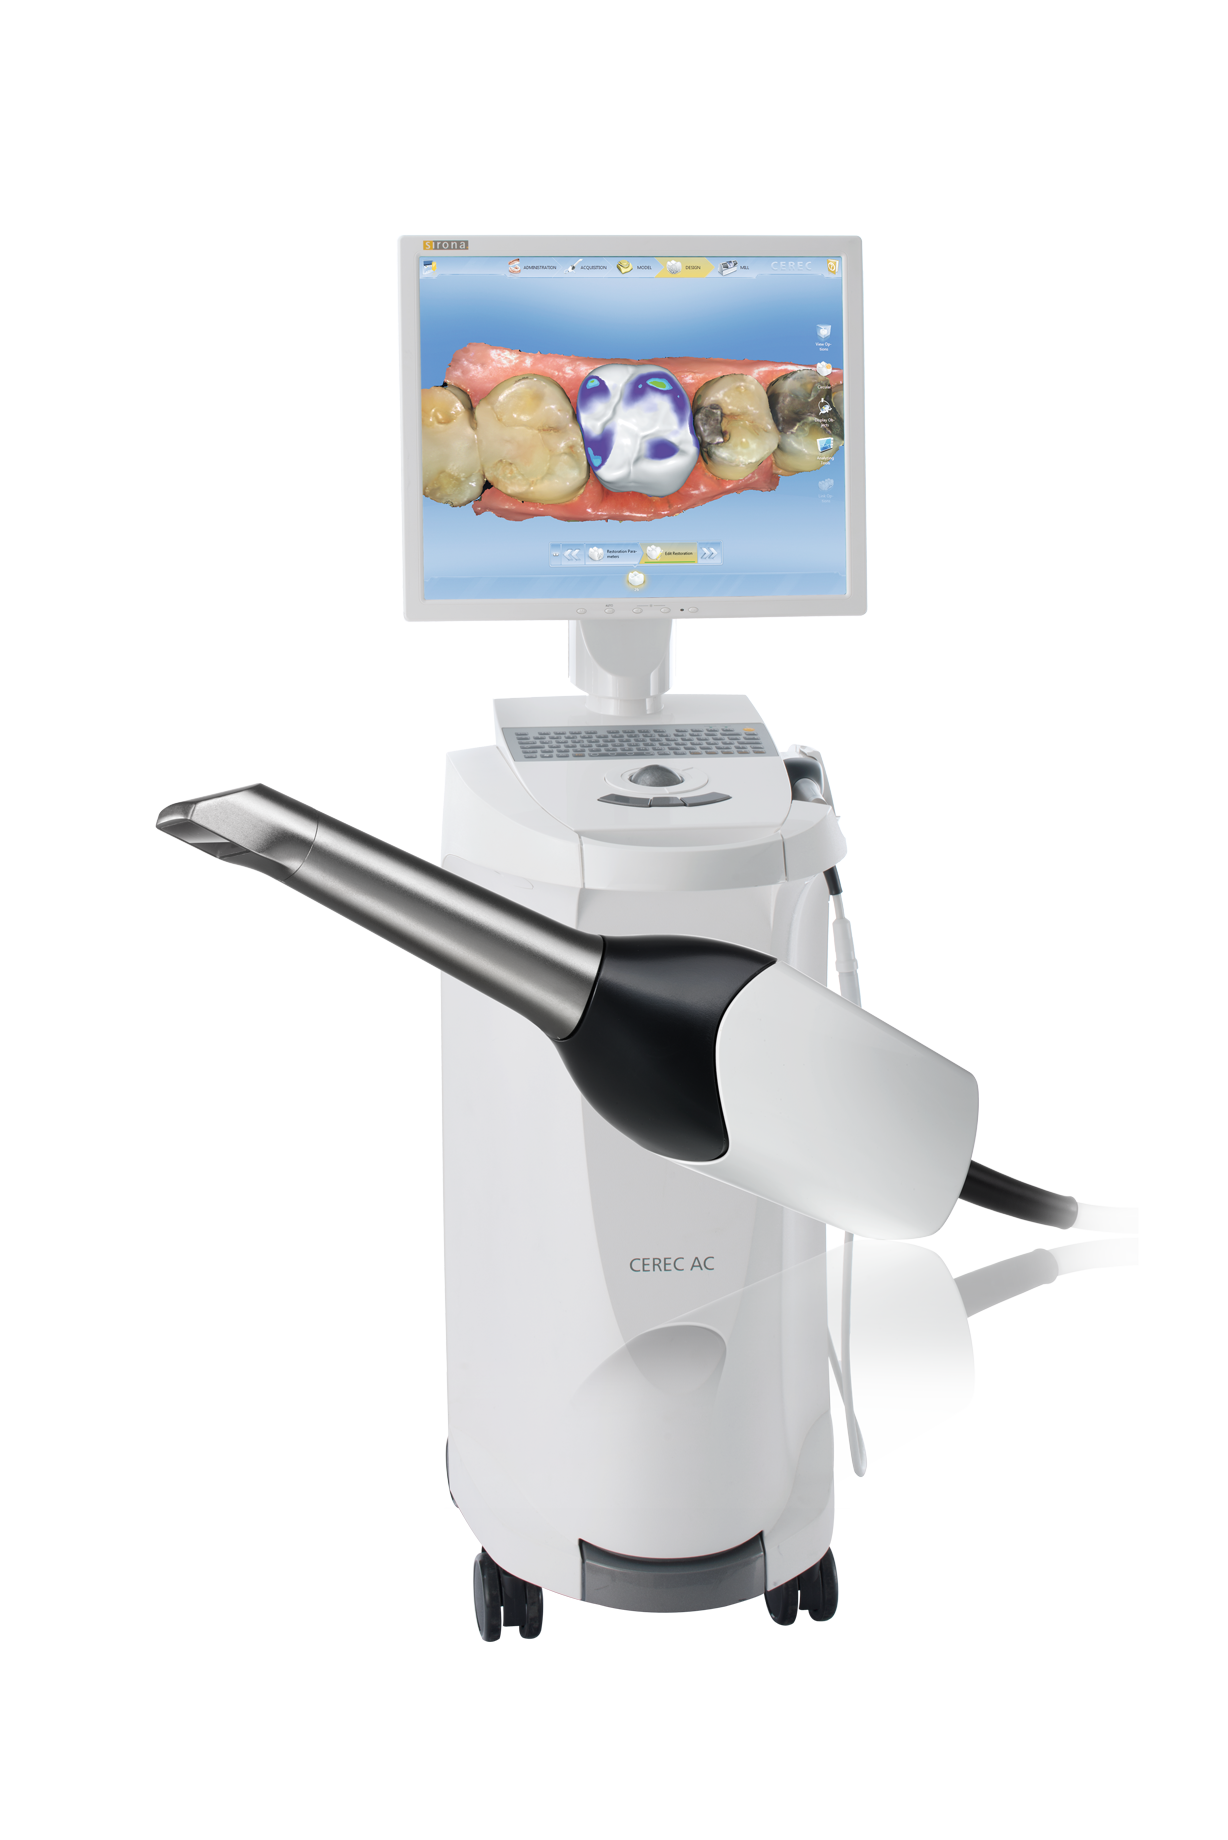 HOW DOES THIS CEREC TECHNOLOGY WORK